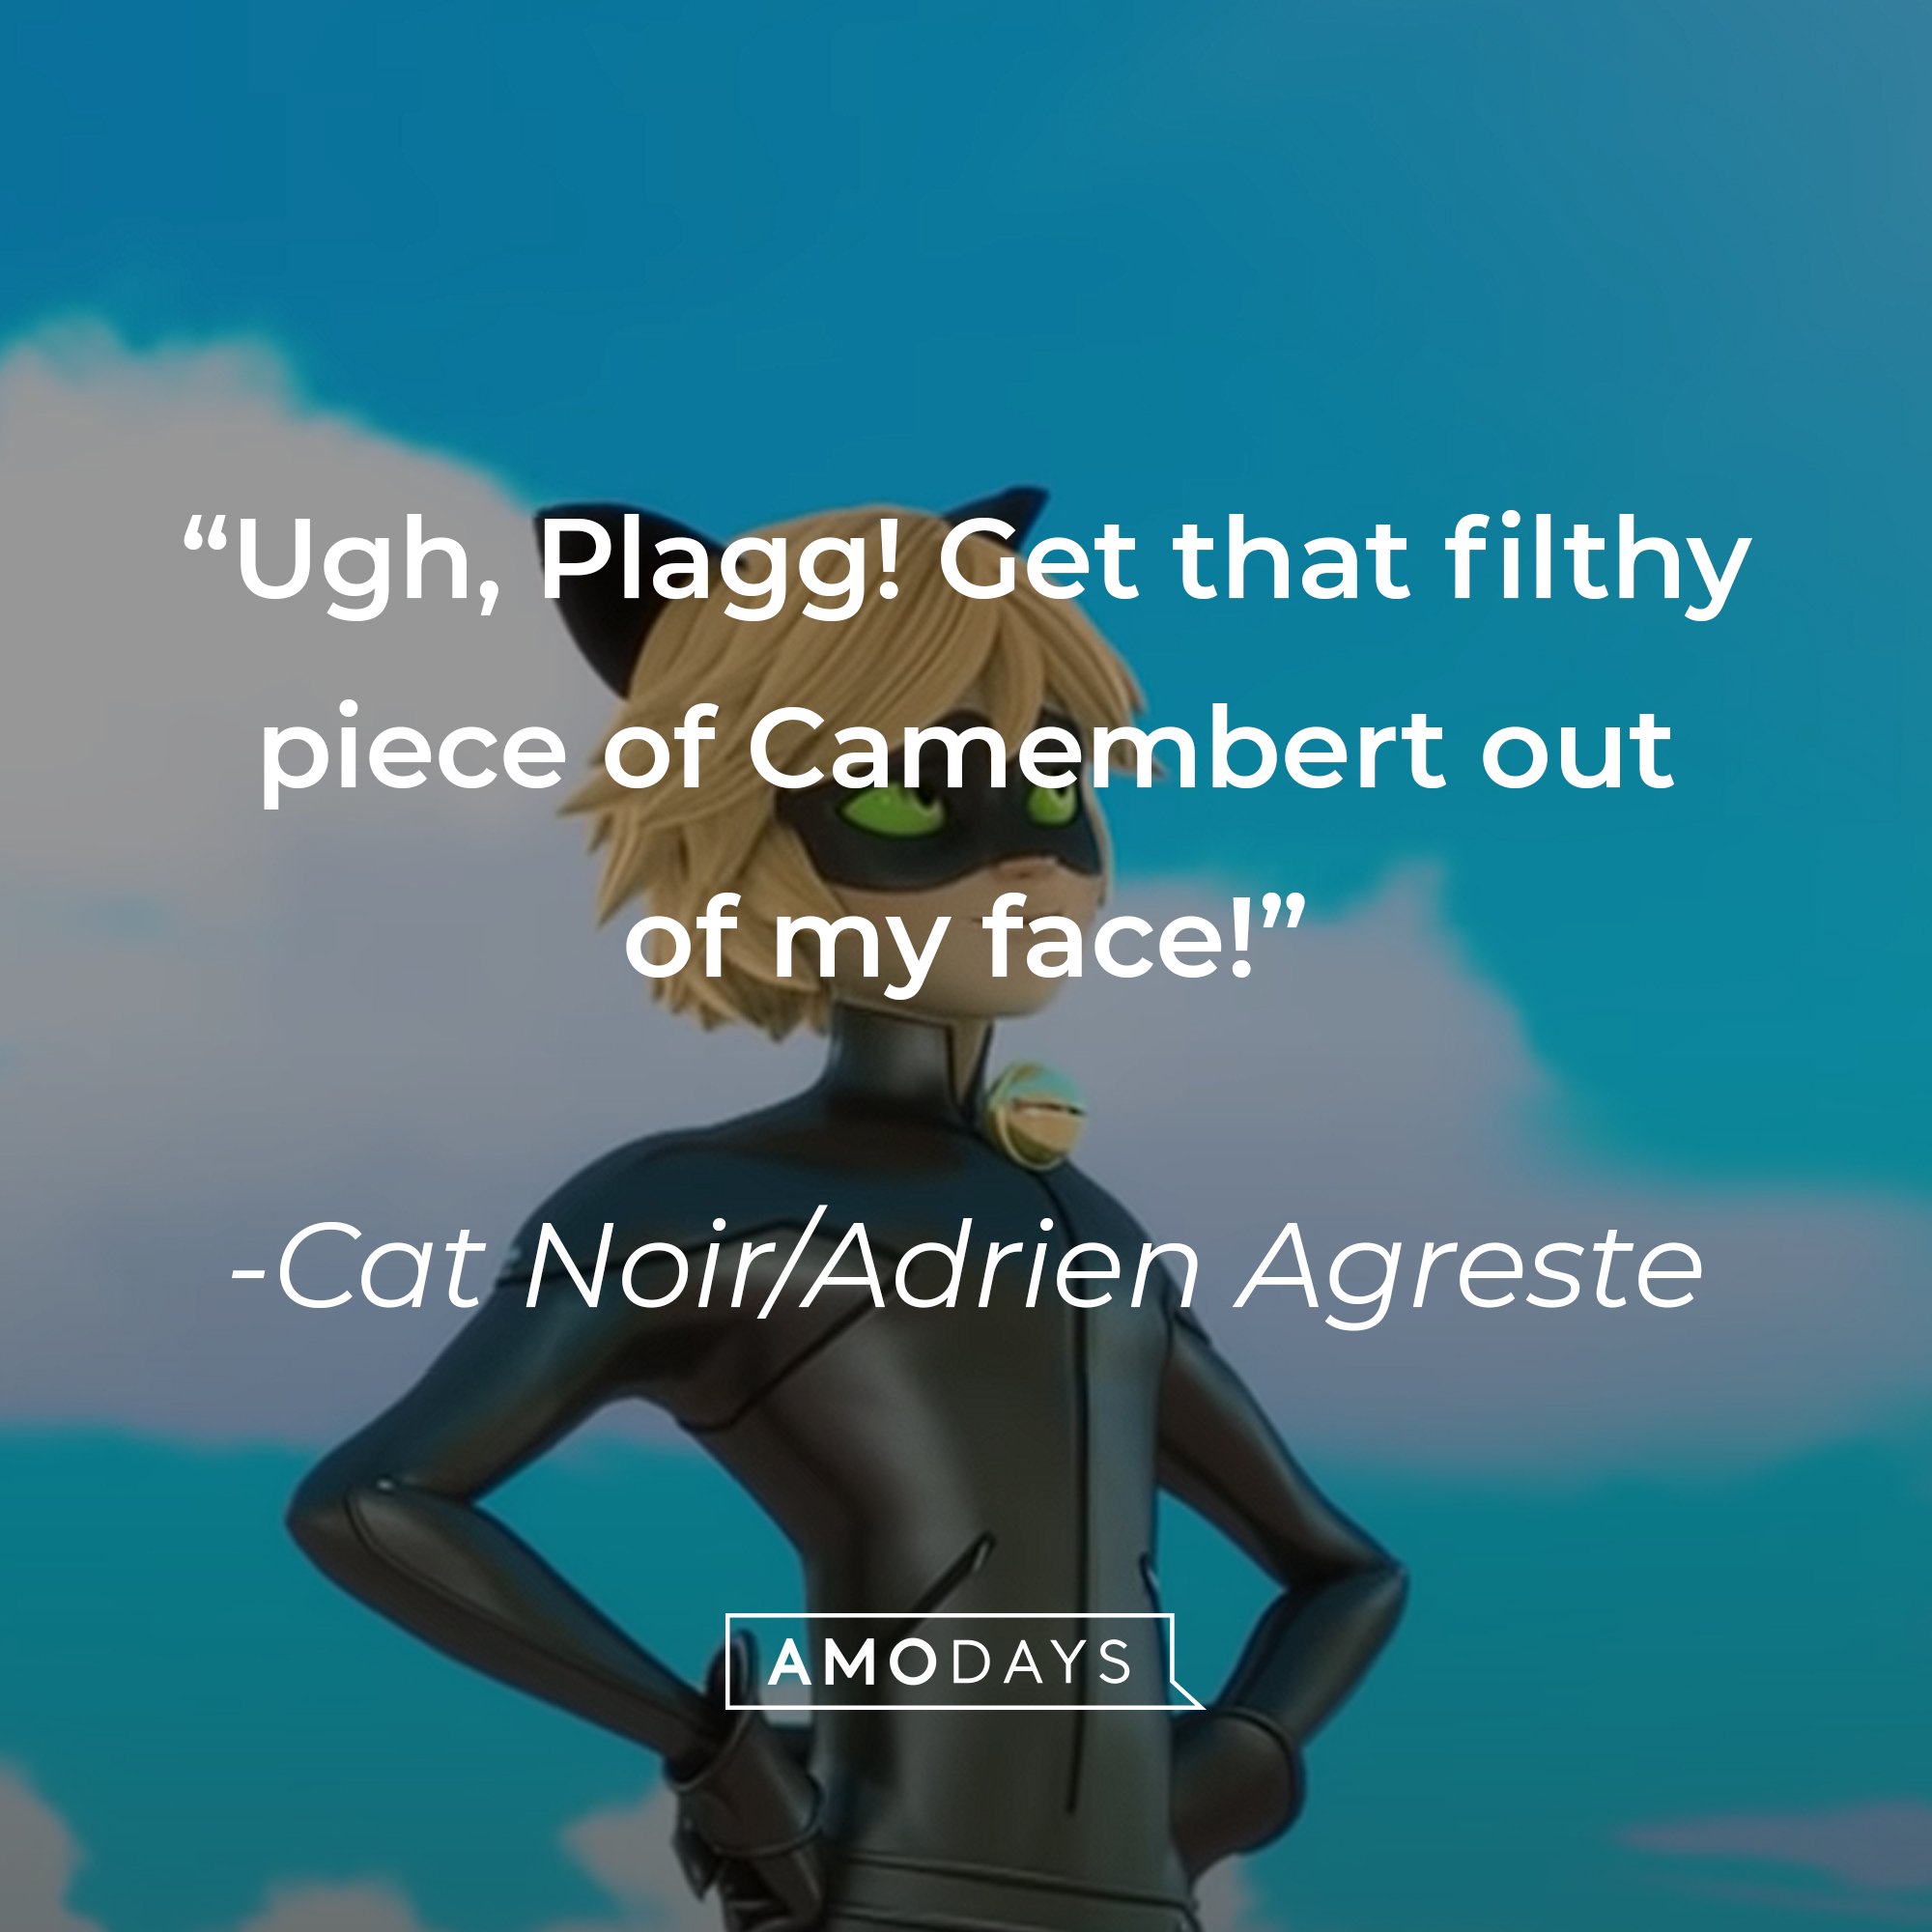 Cat Noir/Adrien Agreste’s quote: “Ugh, Plagg! Get that filthy piece of Camembert out of my face!” | Image: AmoDays 